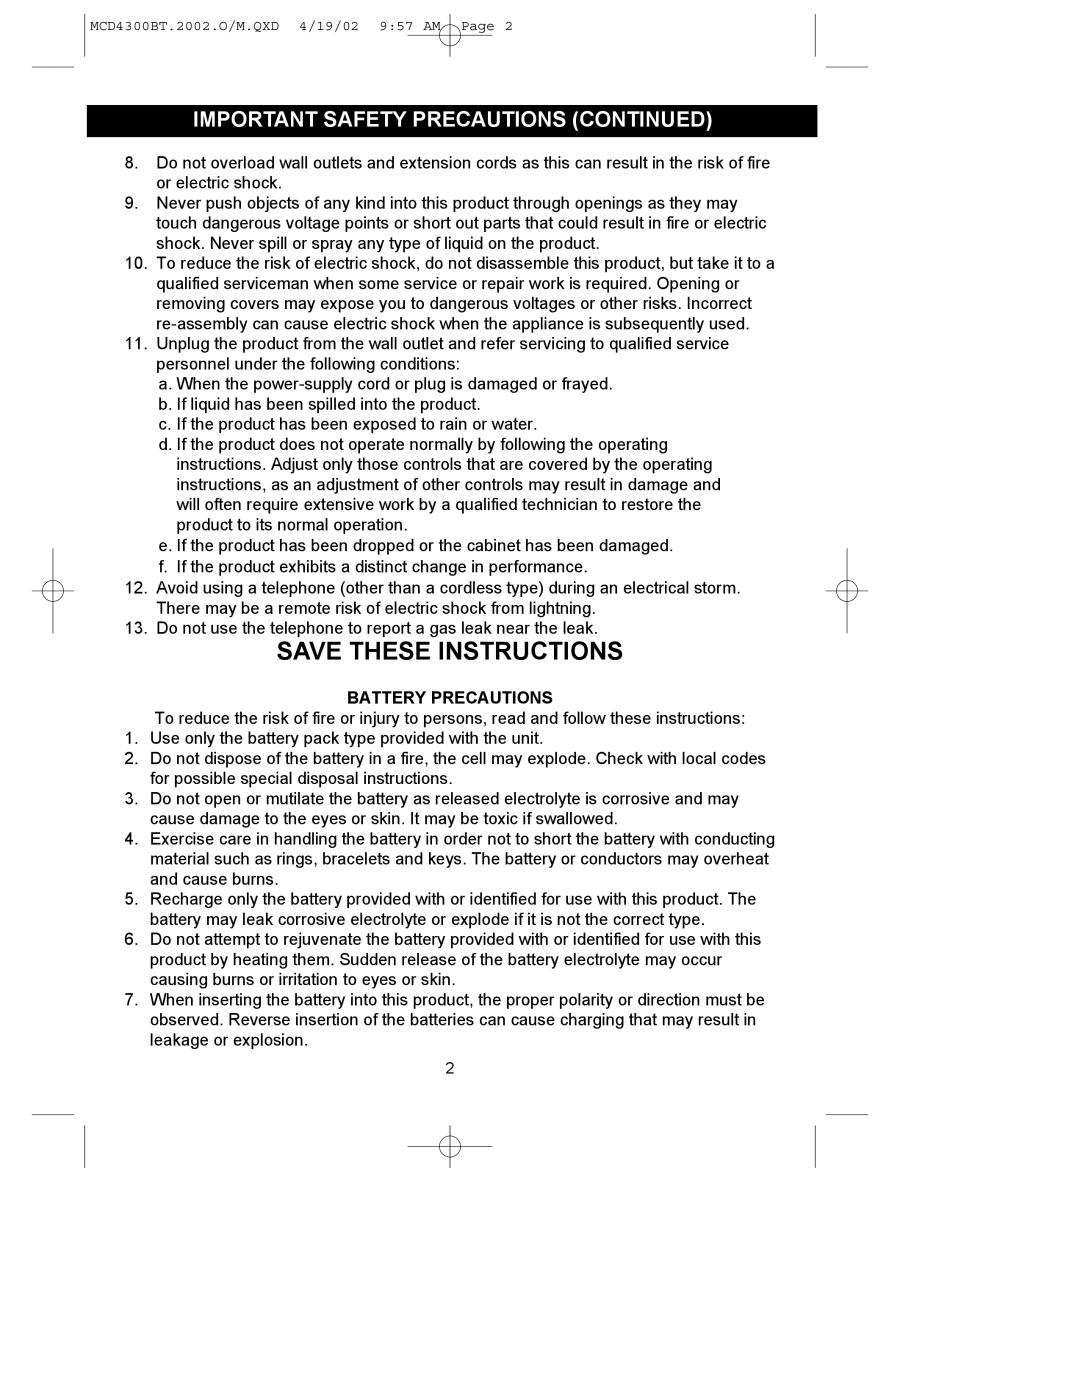 Memorex MCD4300BT operating instructions Save These Instructions, Important Safety Precautions Continued 